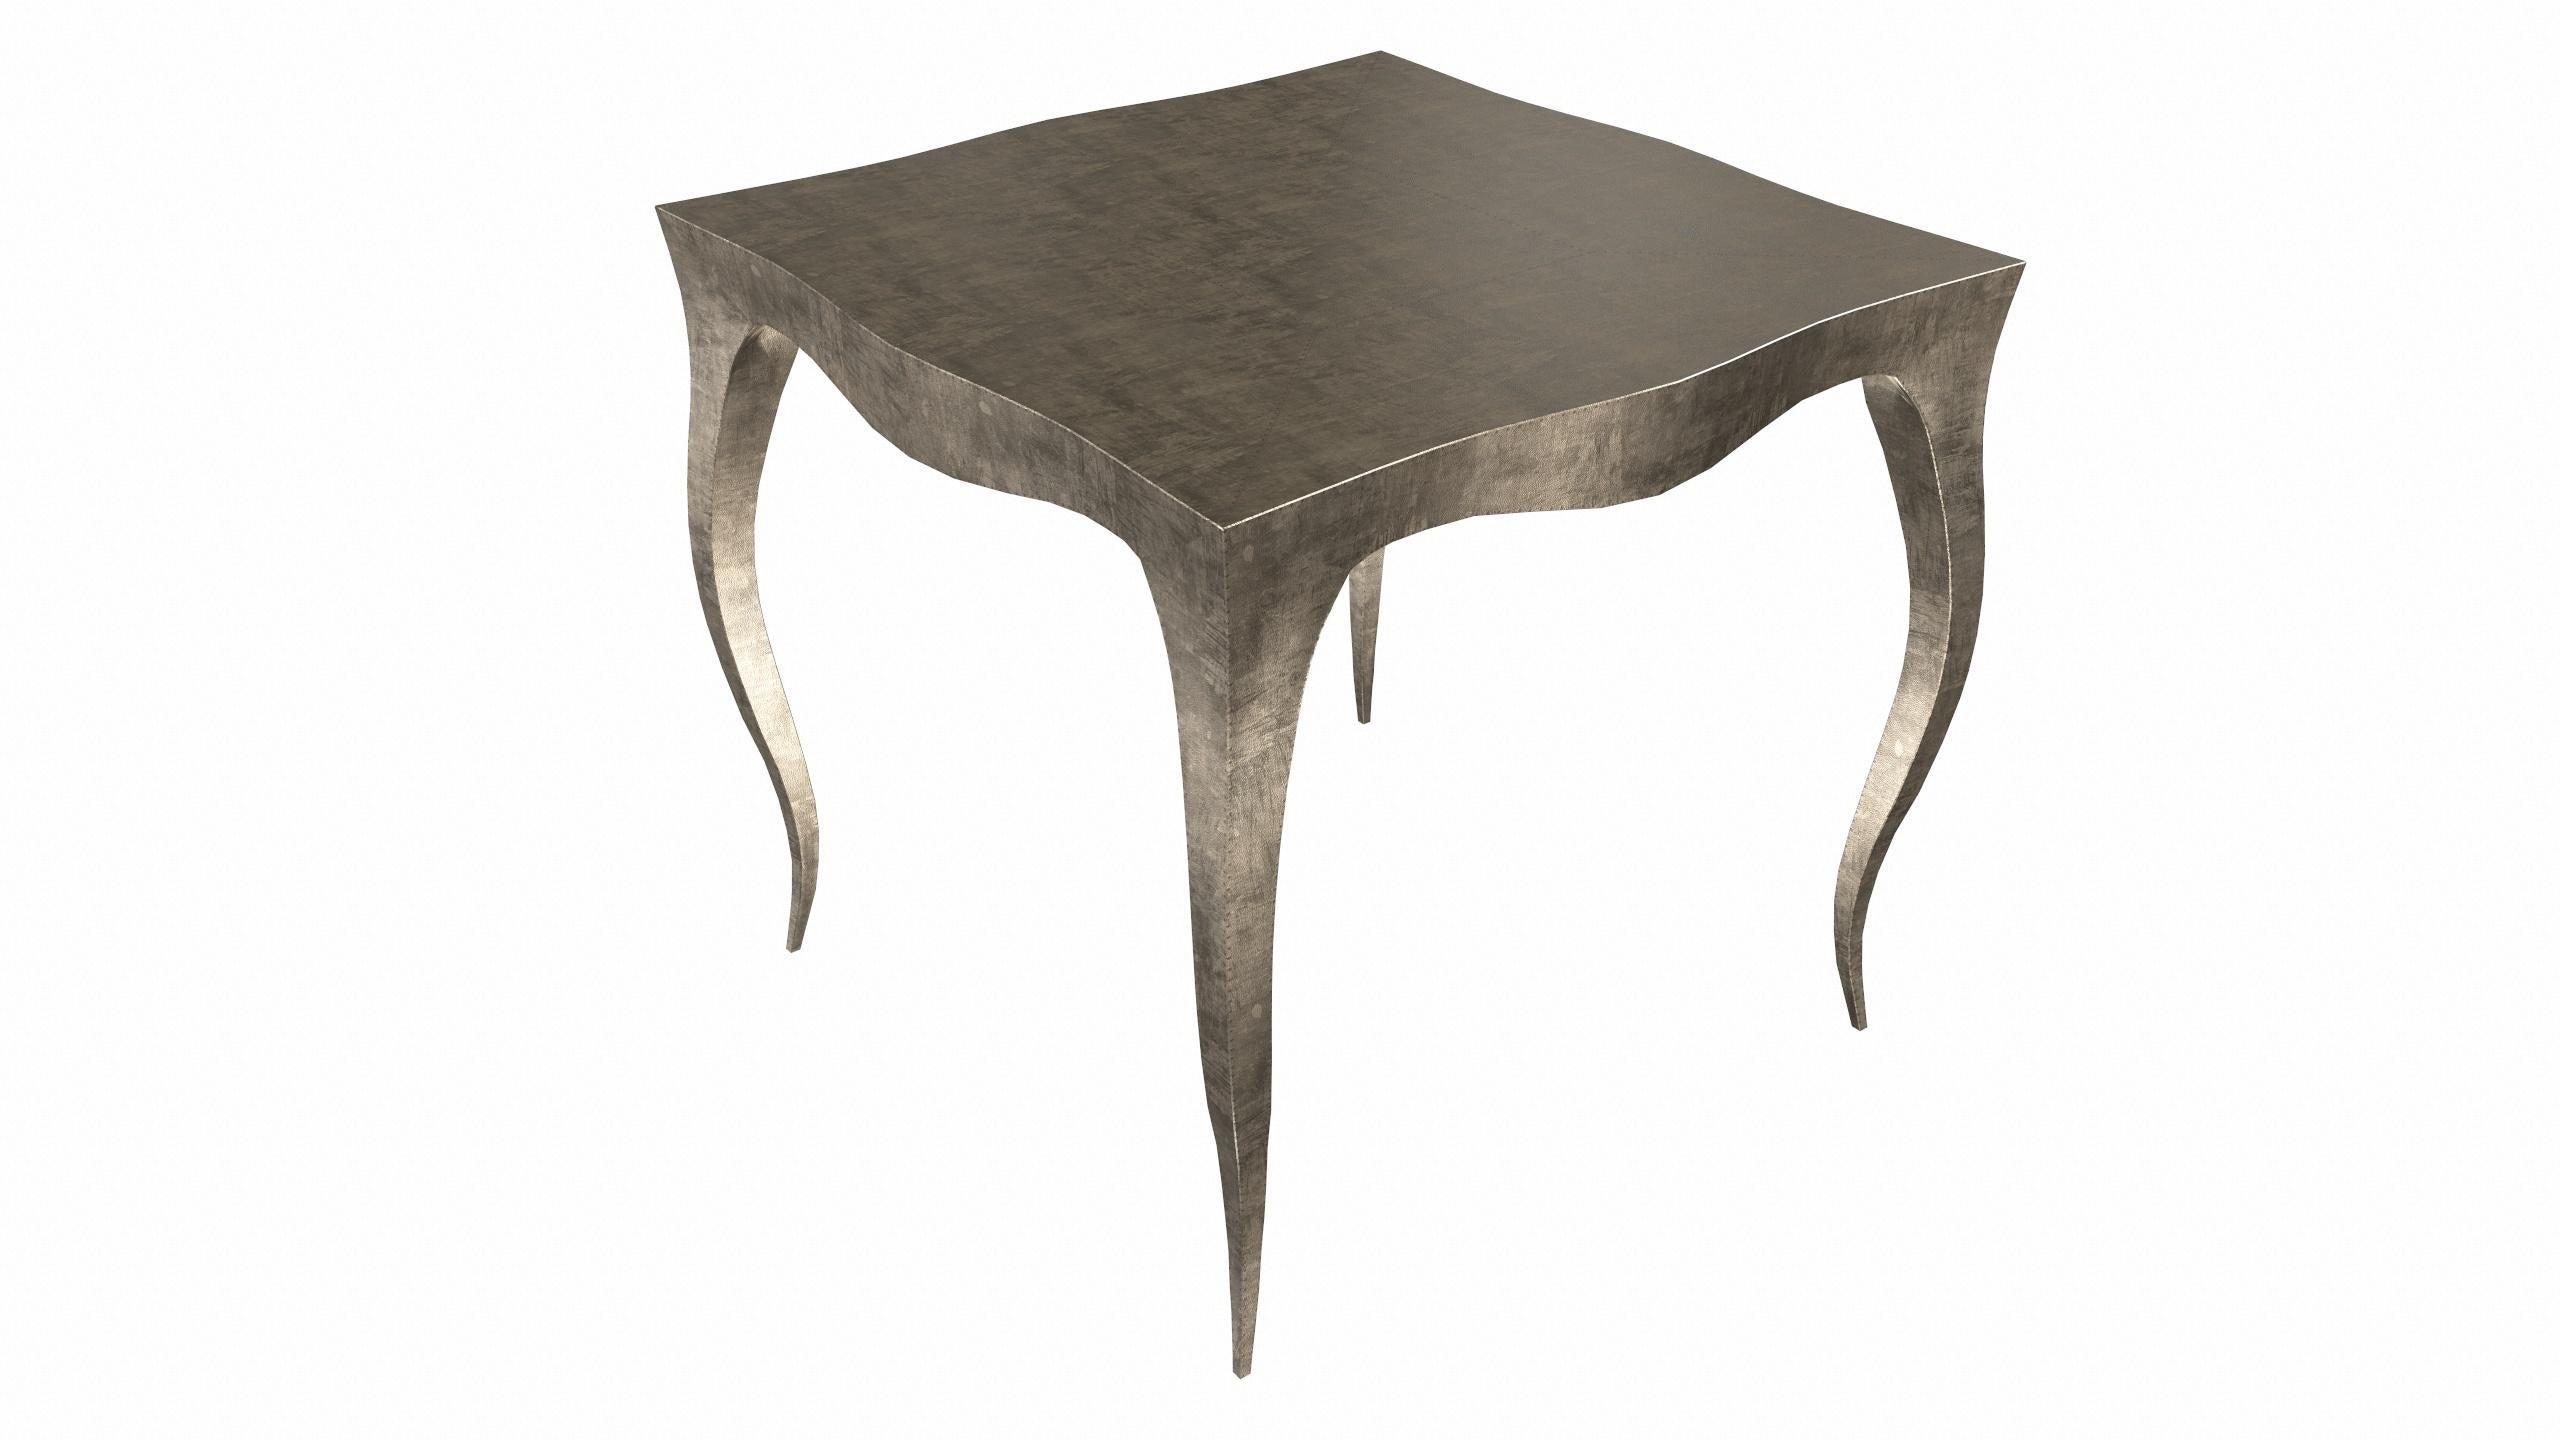 Metal Louise Art Deco Conference Tables Fine Hammered Antique Bronze by Paul Mathieu For Sale